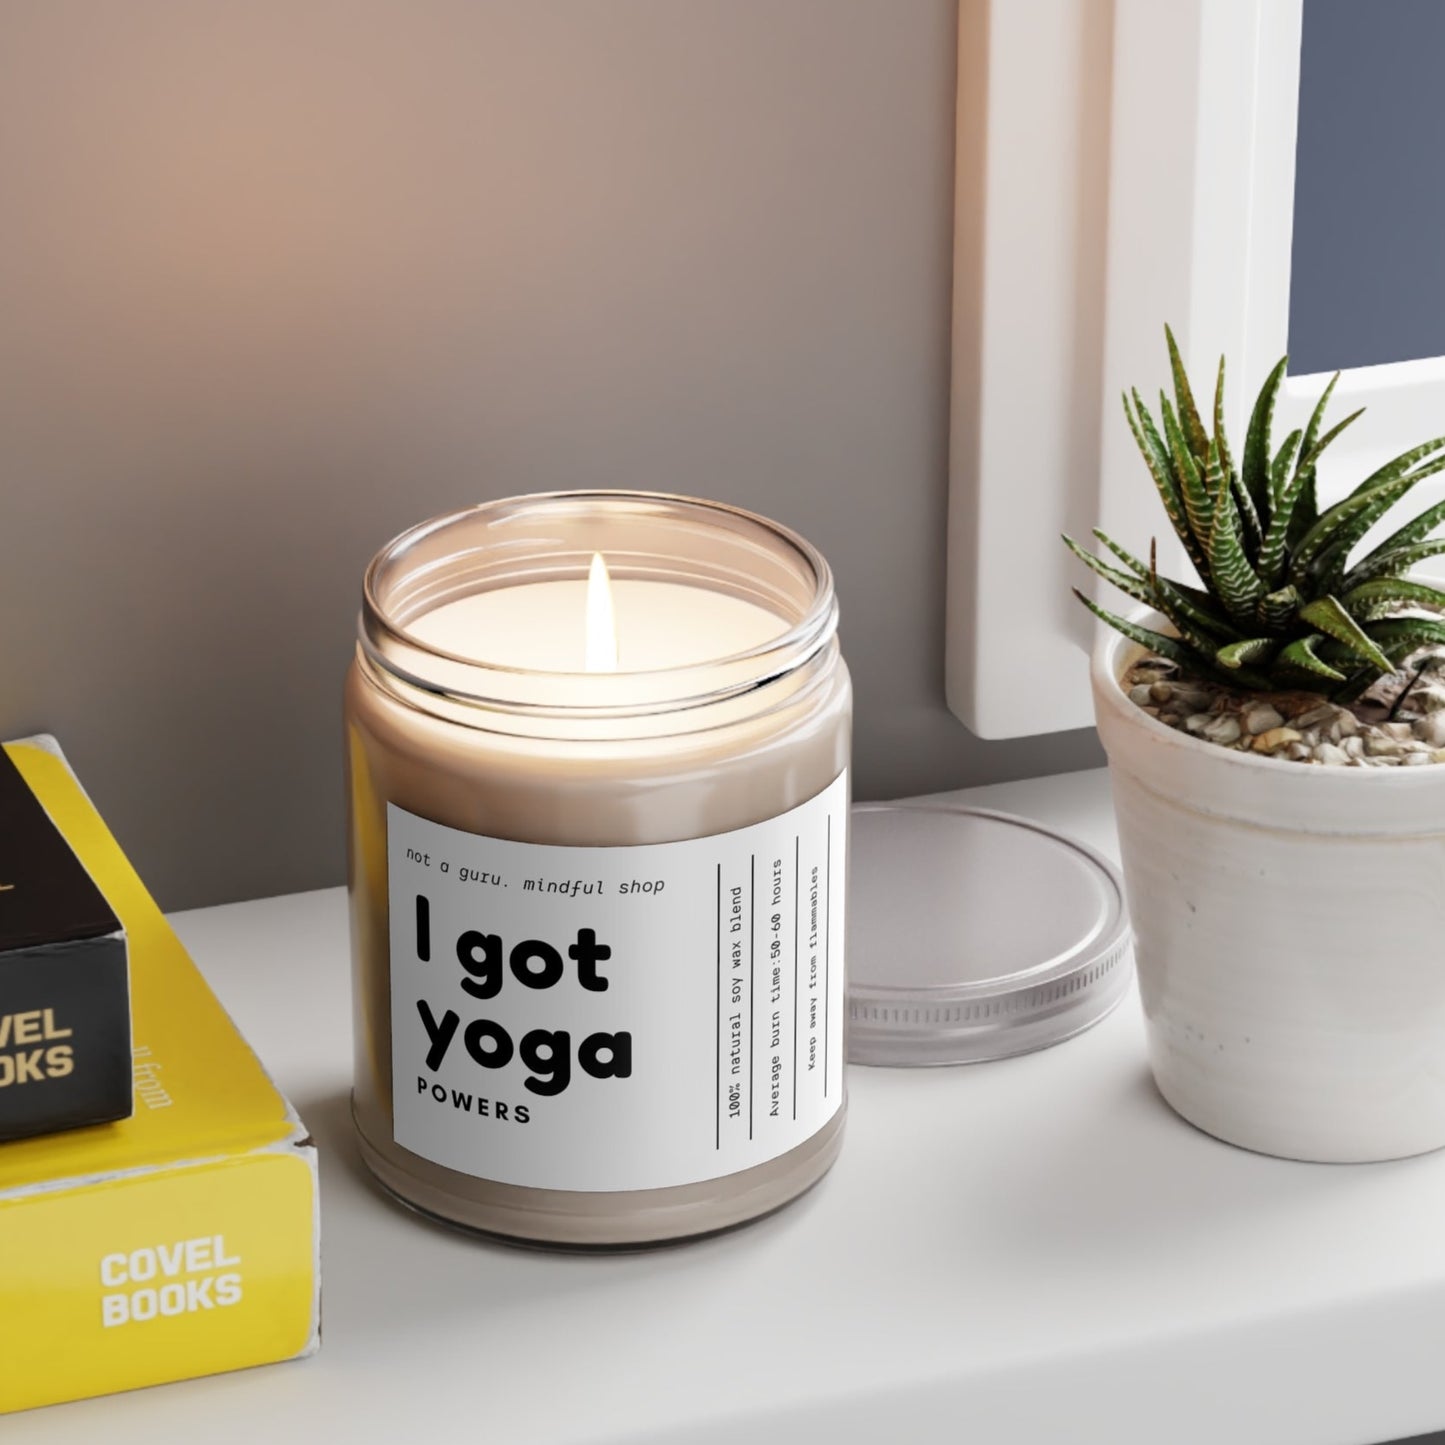 I Got Yoga Powers Scented Candles